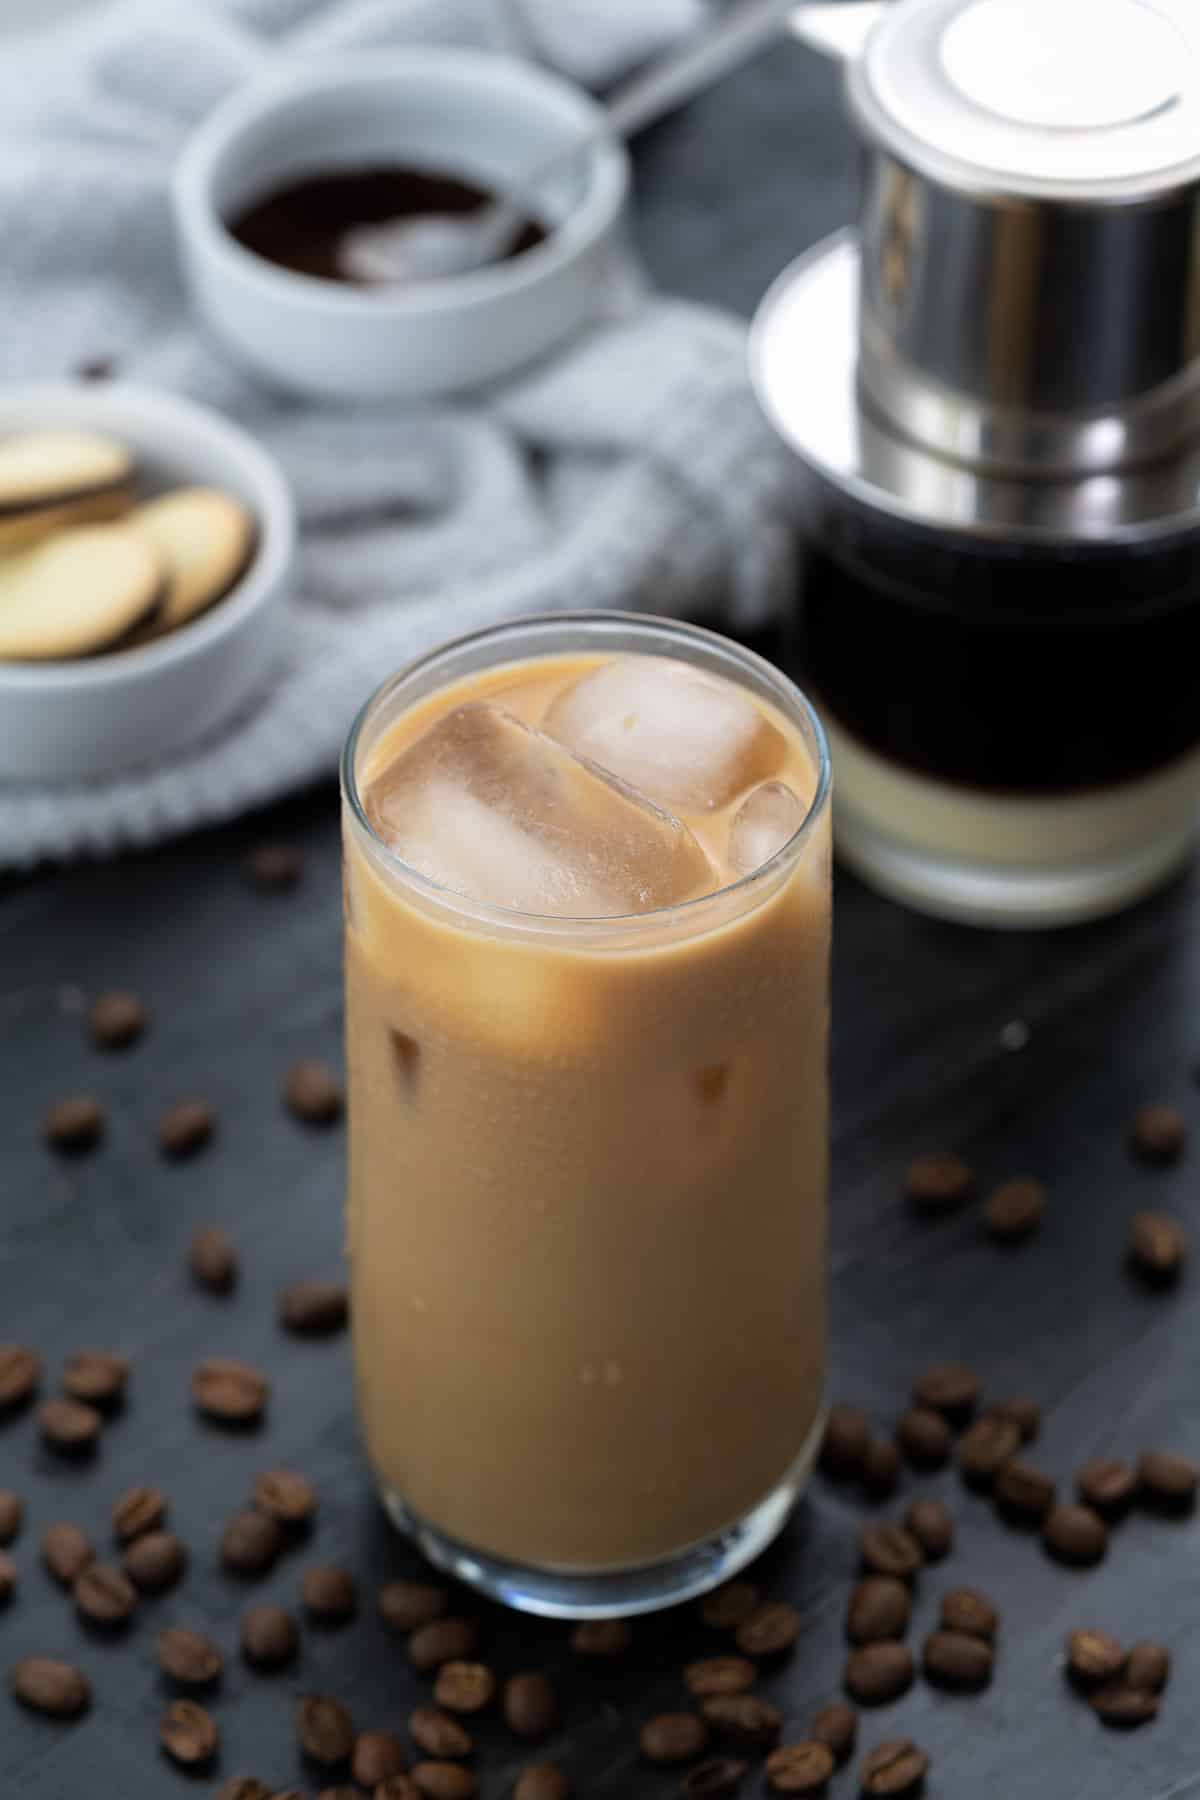 Vietnamese iced Coffee served in a tall glass with coffee beans scattered around and filter placed behind.